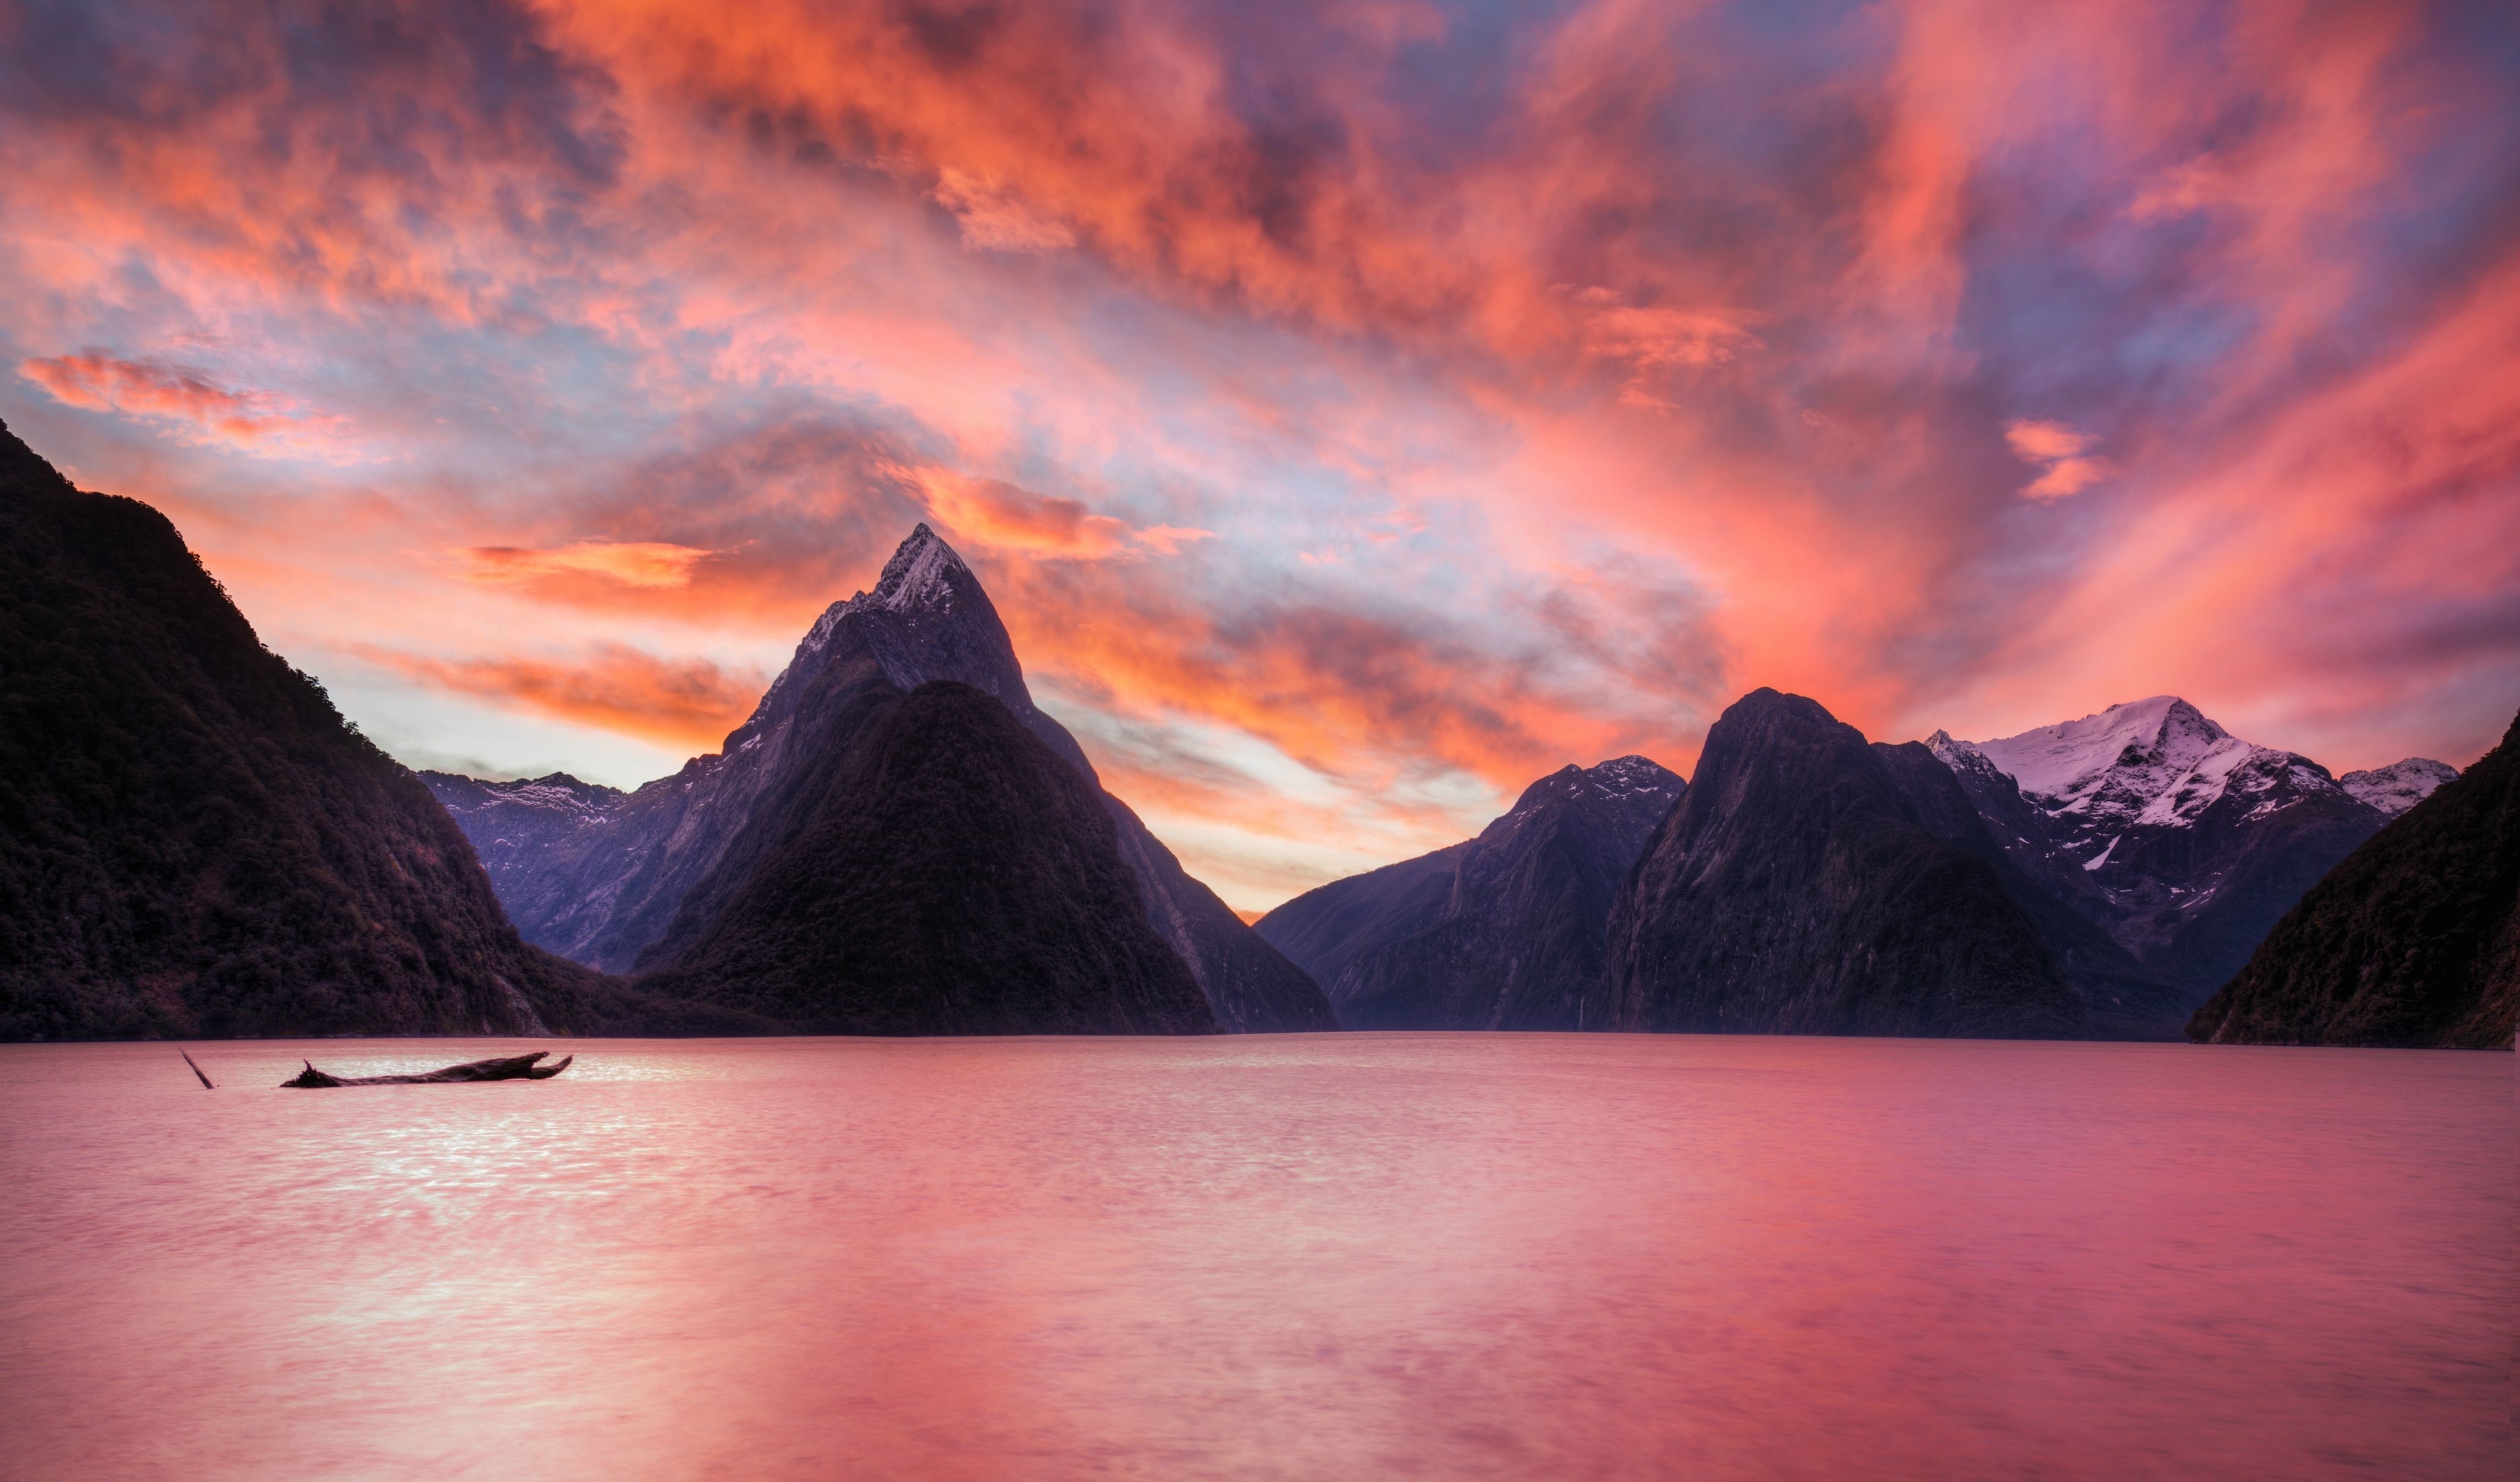 General 4126x2426 mountains water sky clouds landscape lake photography Japan New Zealand Milford Sound low light